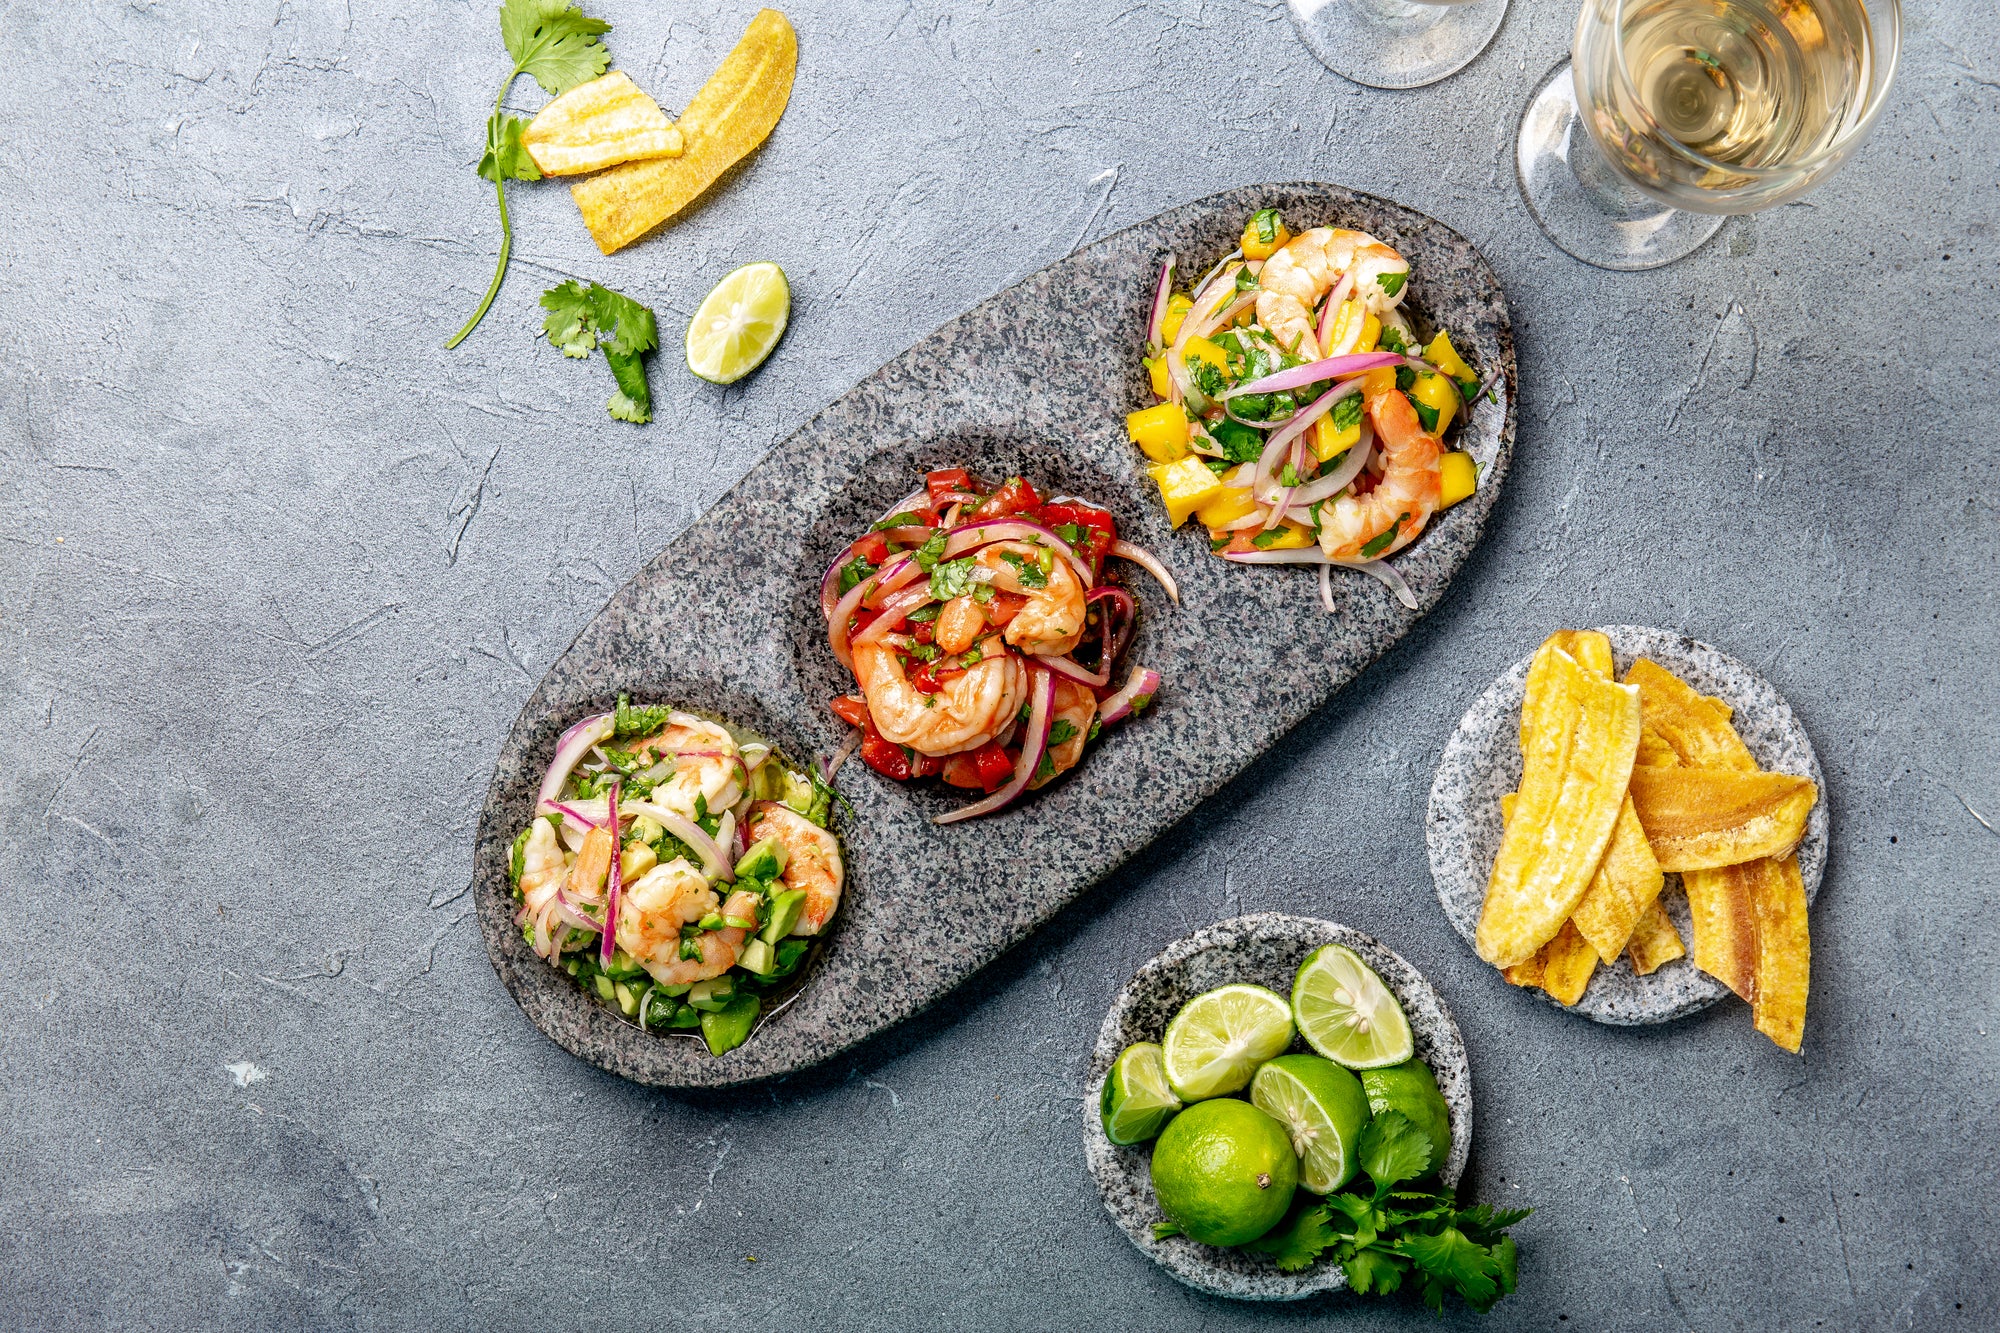 Five Reasons Why Peru is one of the Top Gastronomy Countries in the World